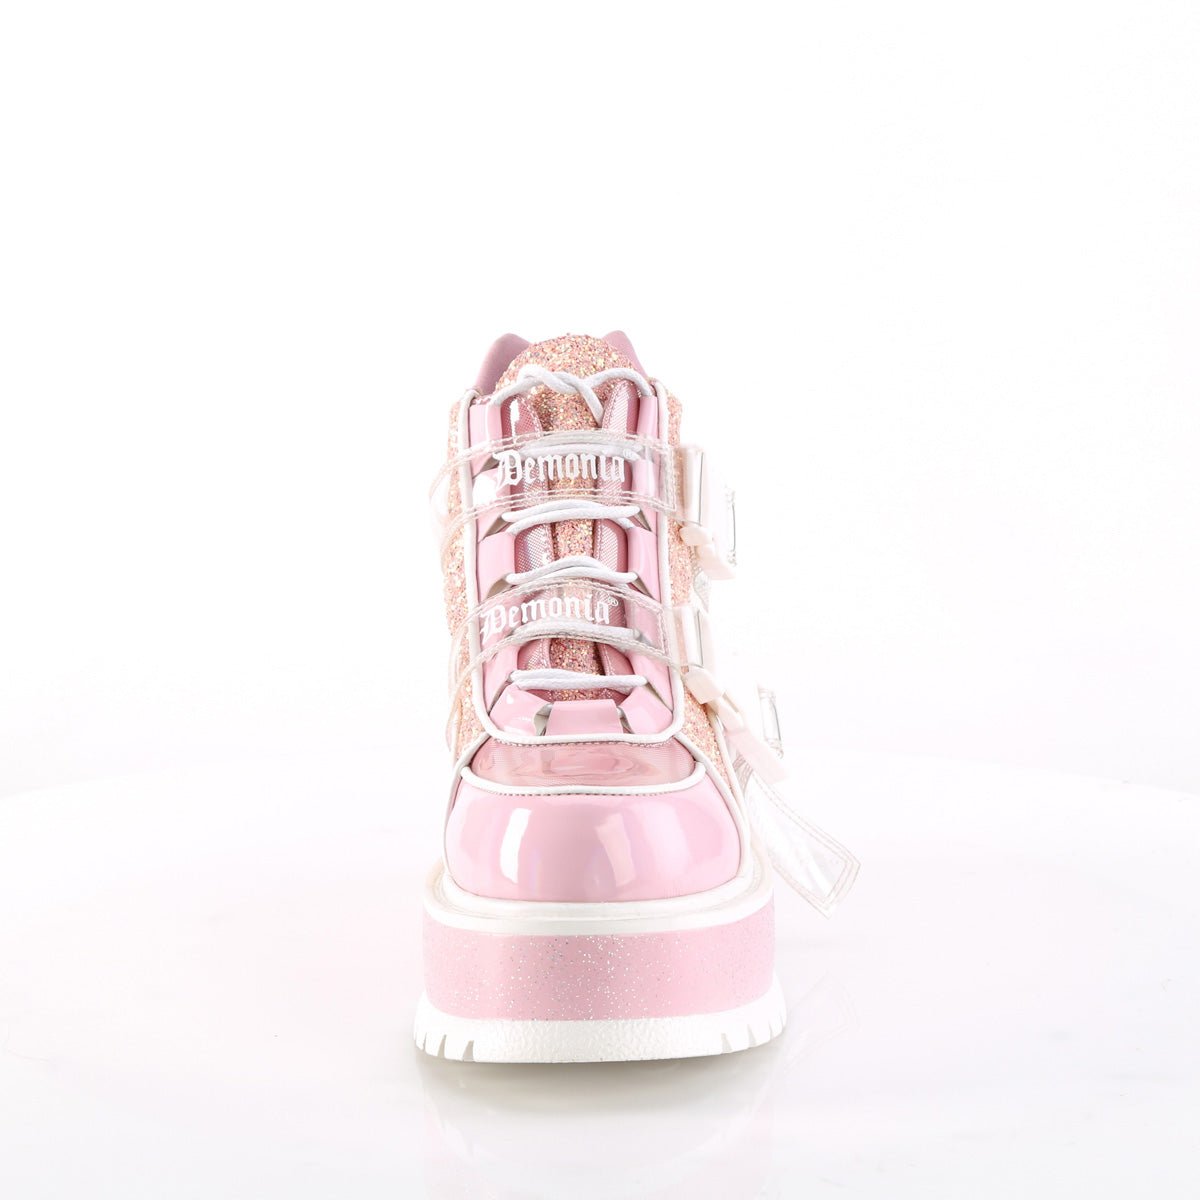 Too Fast | Demonia Slacker 50 | Baby Pink Patent Leather &amp; Glitter Women&#39;s Ankle Boots